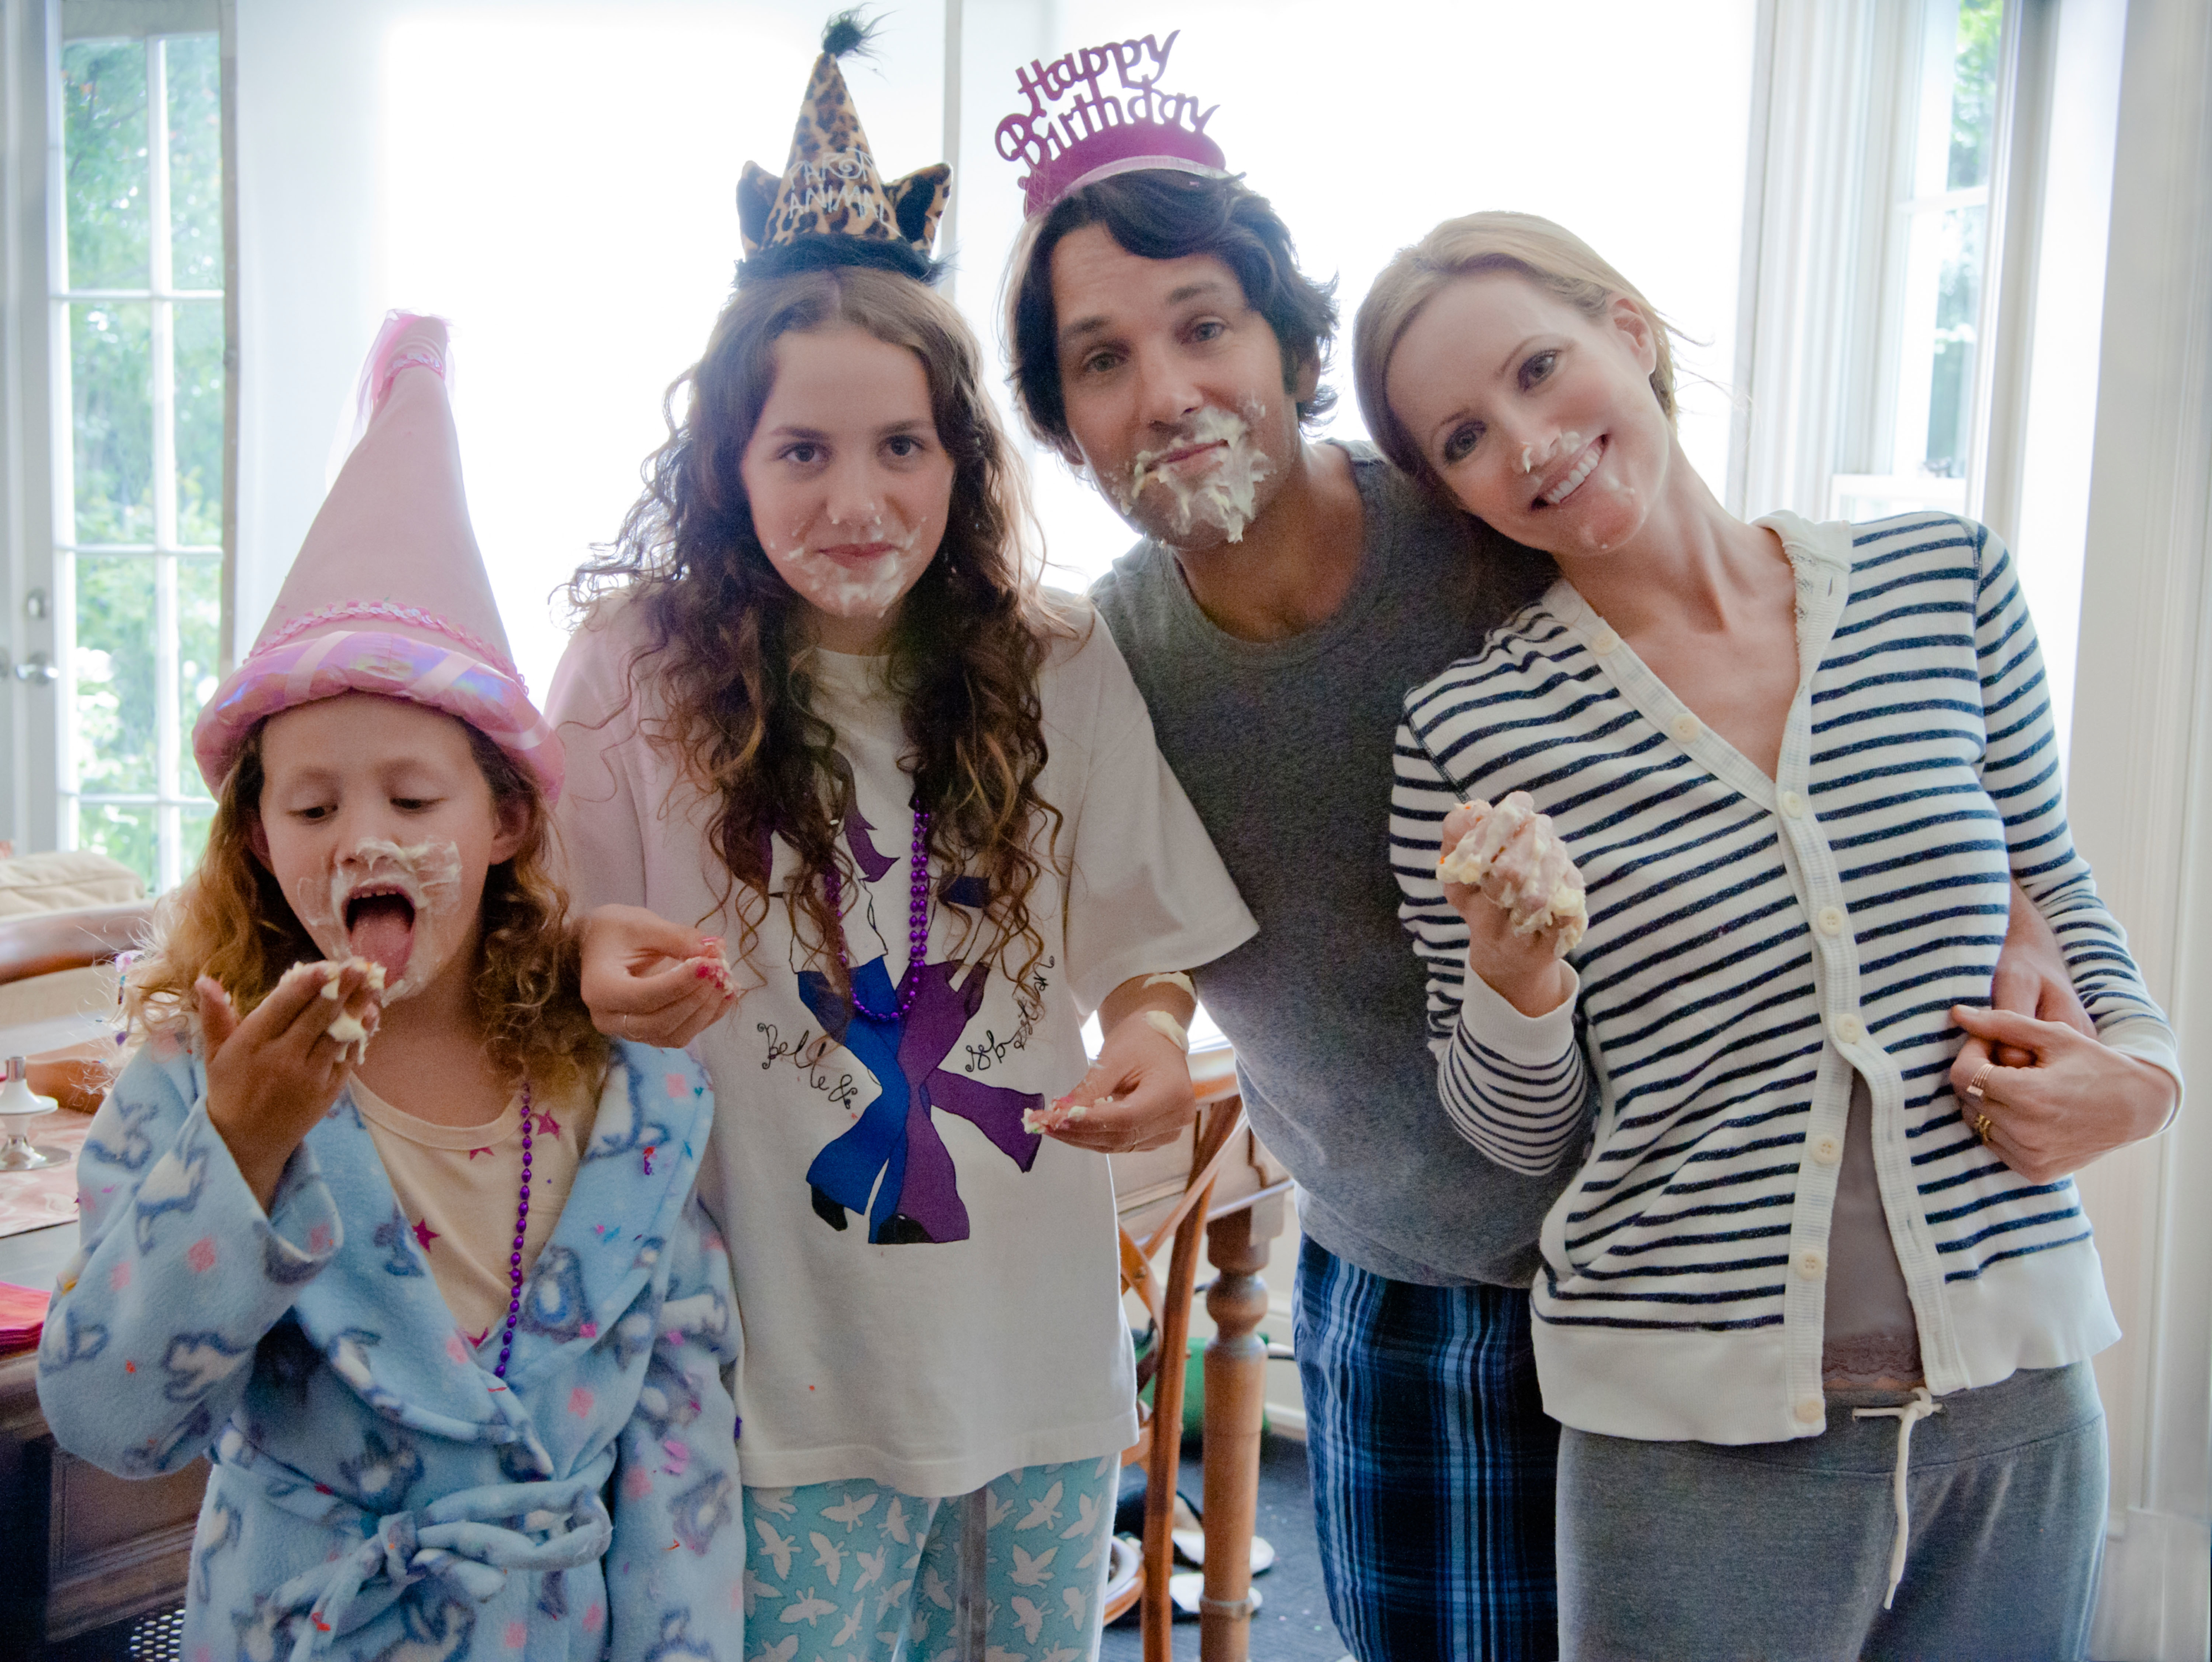 Family celebrating a birthday with cake; two children and two adults, smiling, with party hats